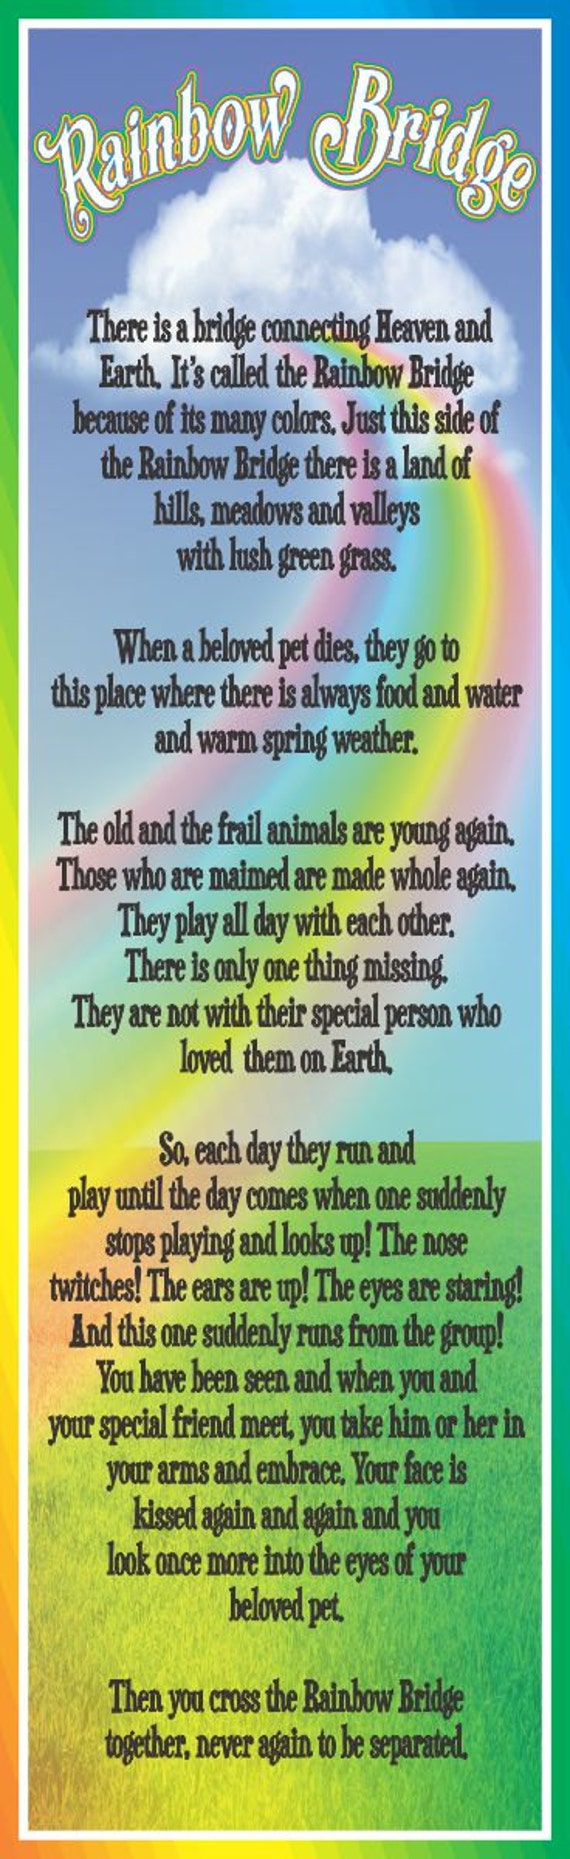 Rainbow Bridge Poem Pet Loss Inspirational Sign with Colorful